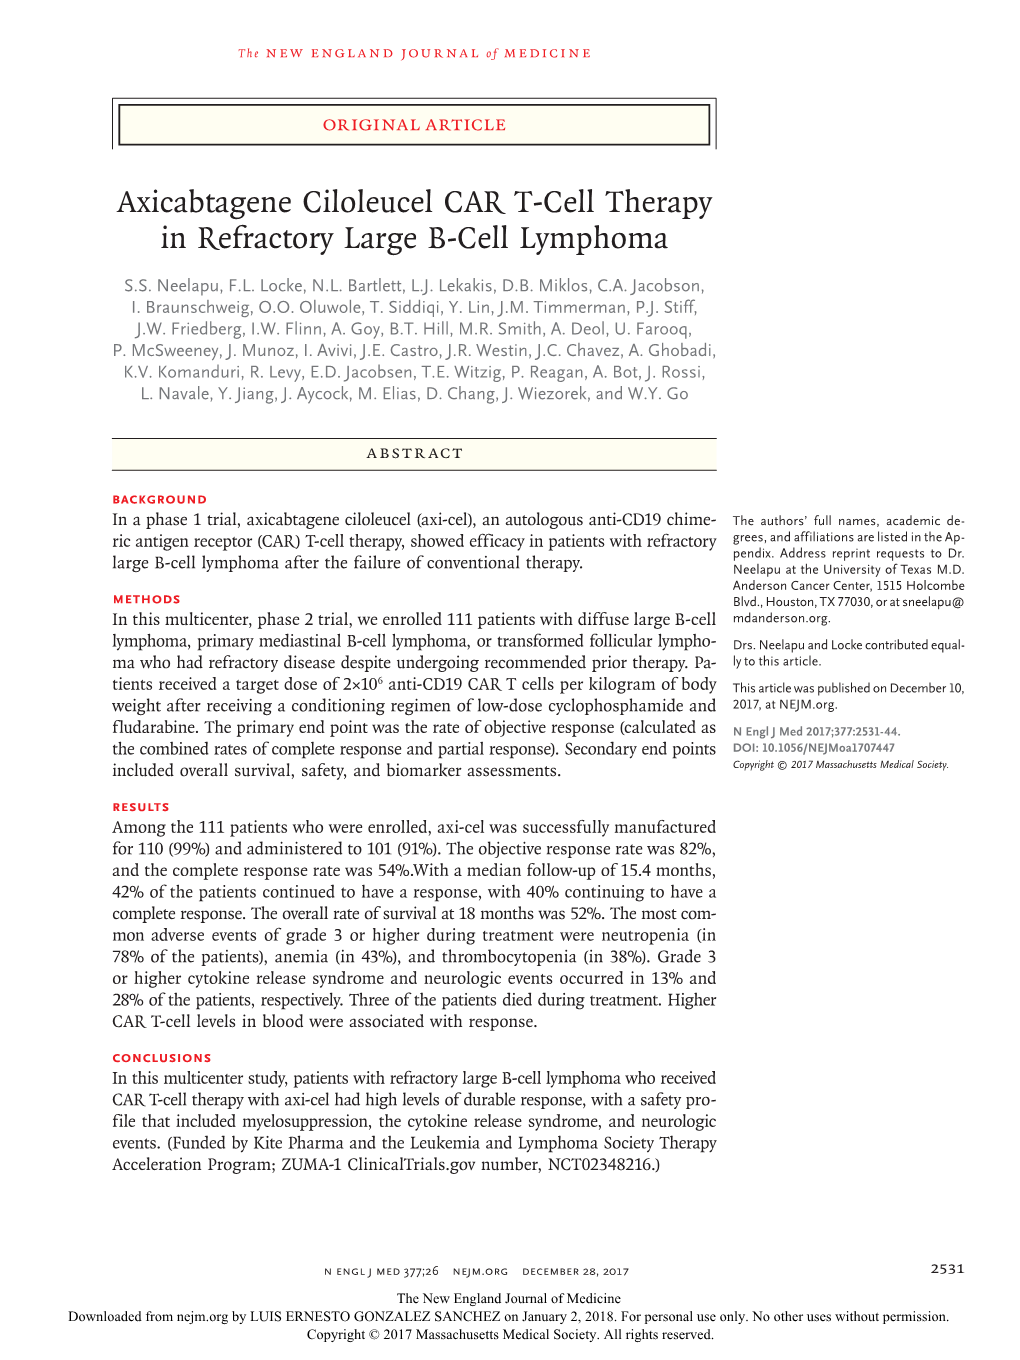 Axicabtagene Ciloleucel CAR T-Cell Therapy in Refractory Large B-Cell Lymphoma